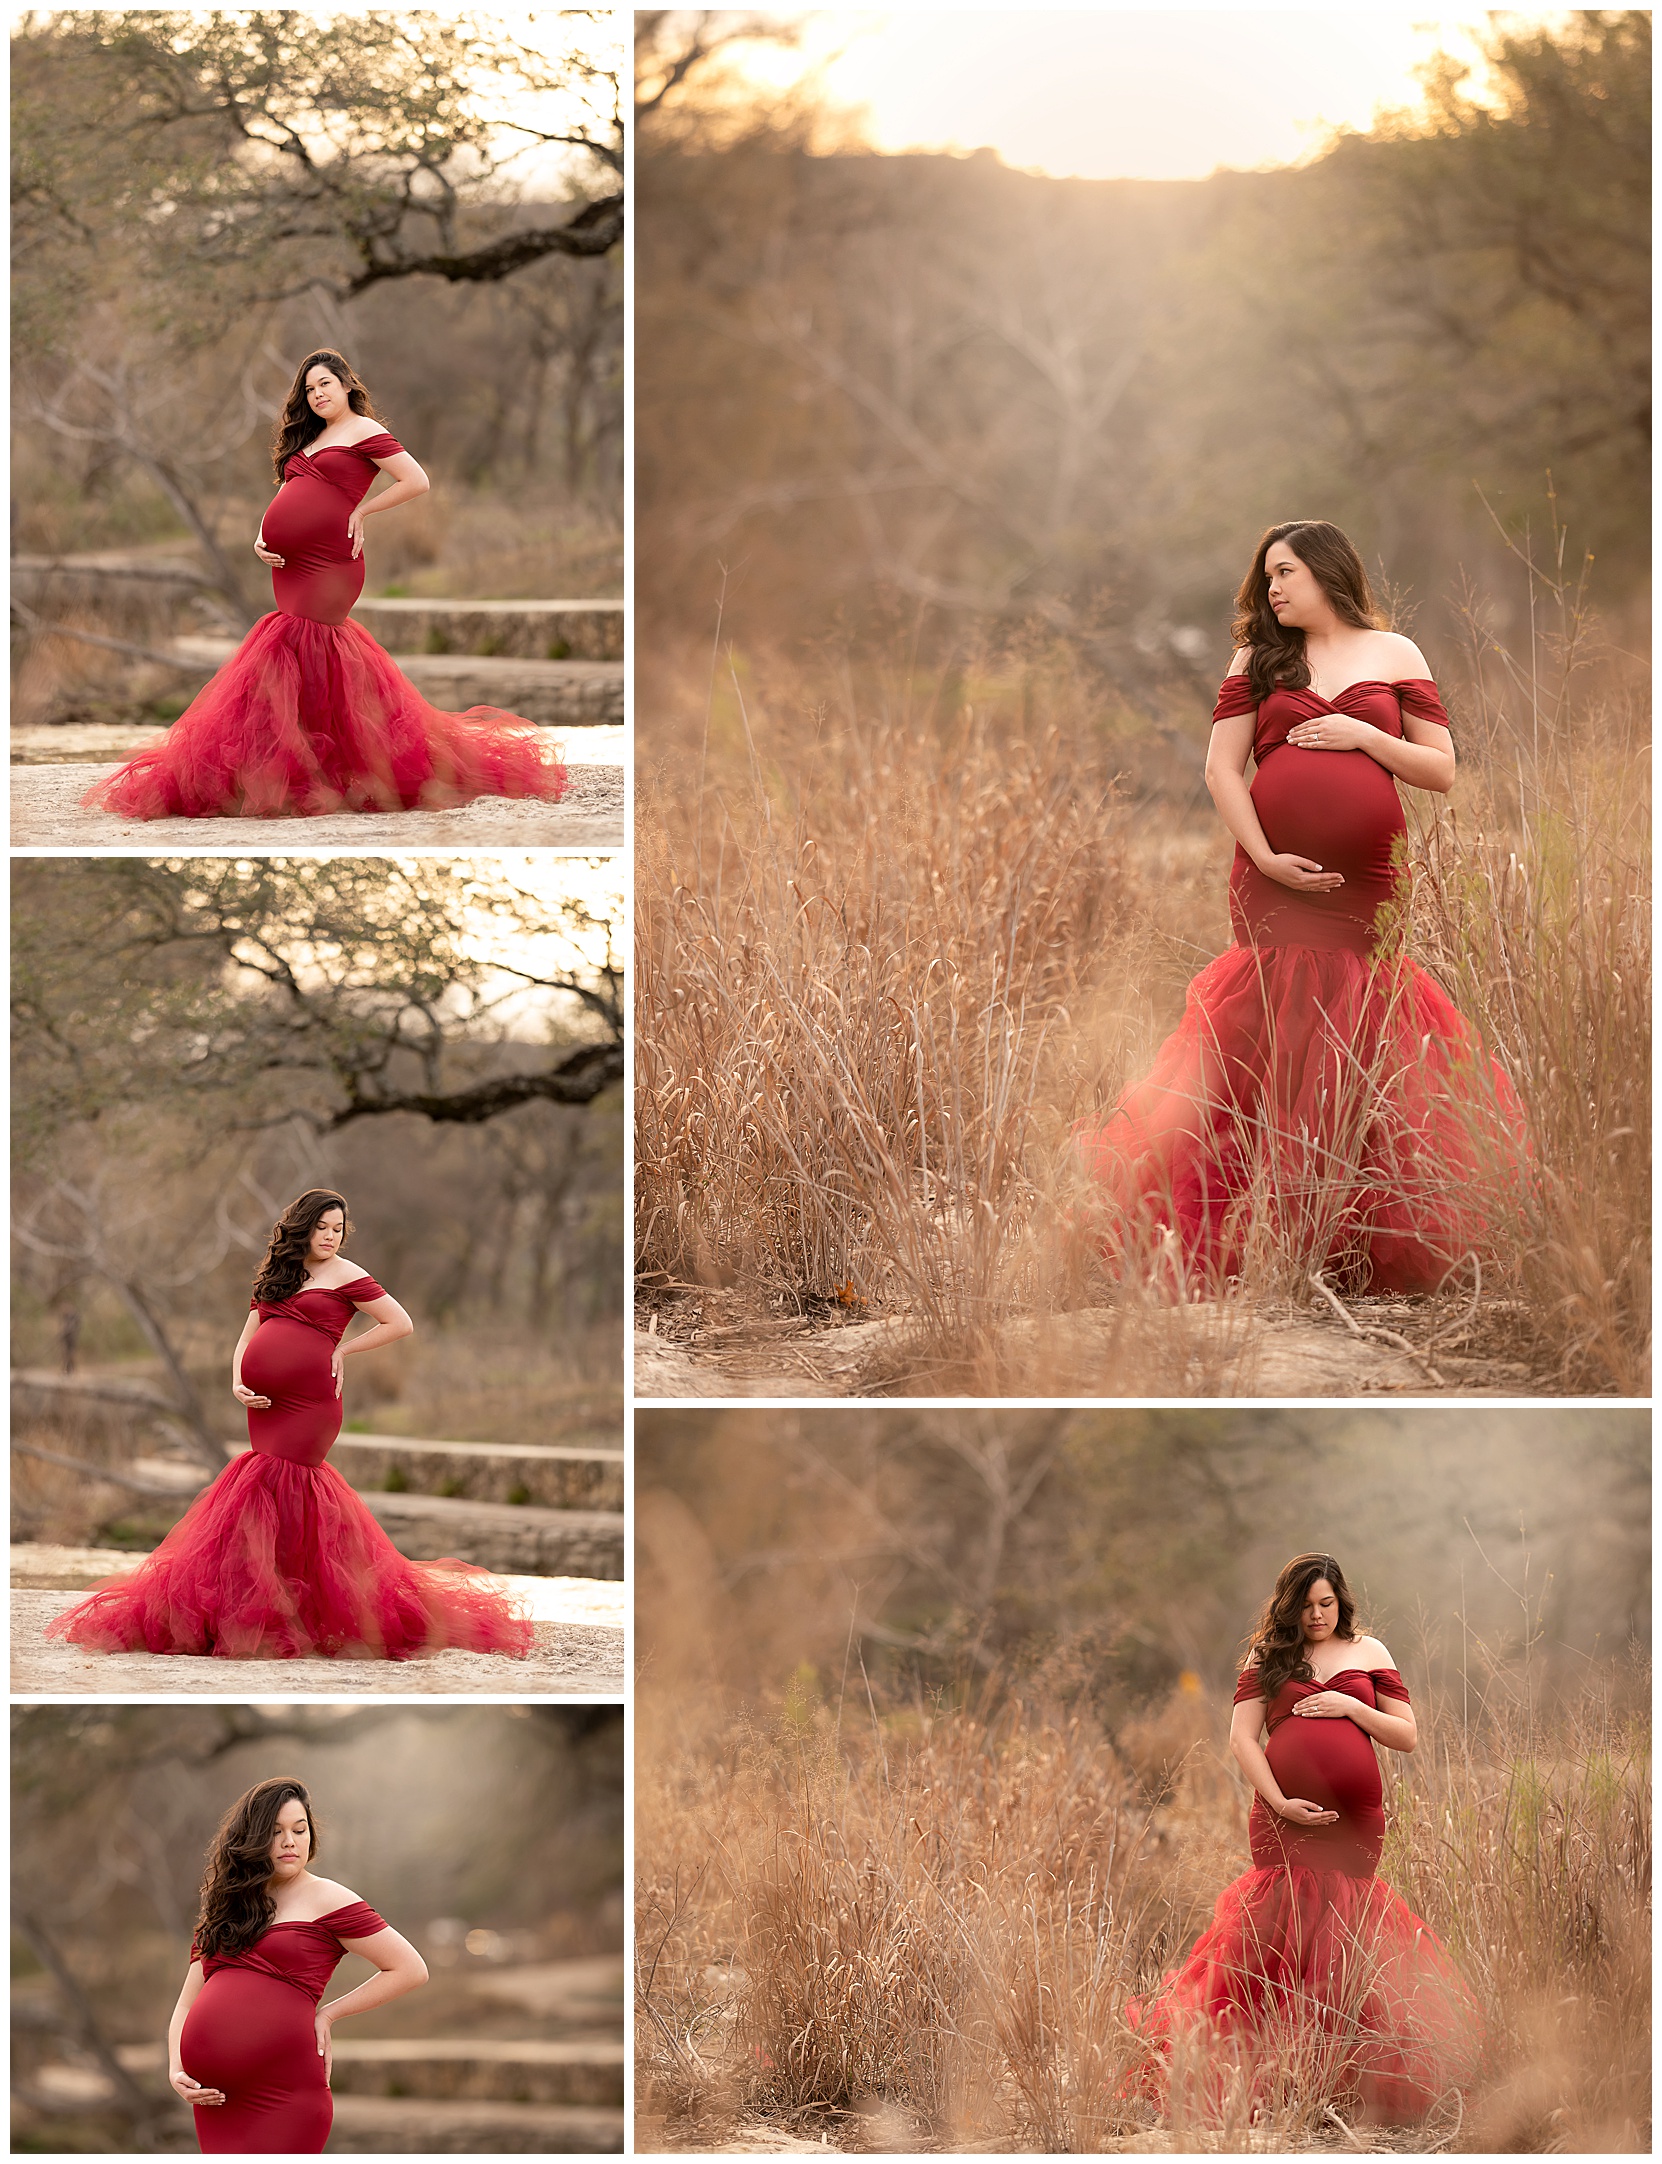 Montage of outdoor baby bump photos featuring a woman in a red maternity gown against a Texas shrubscape